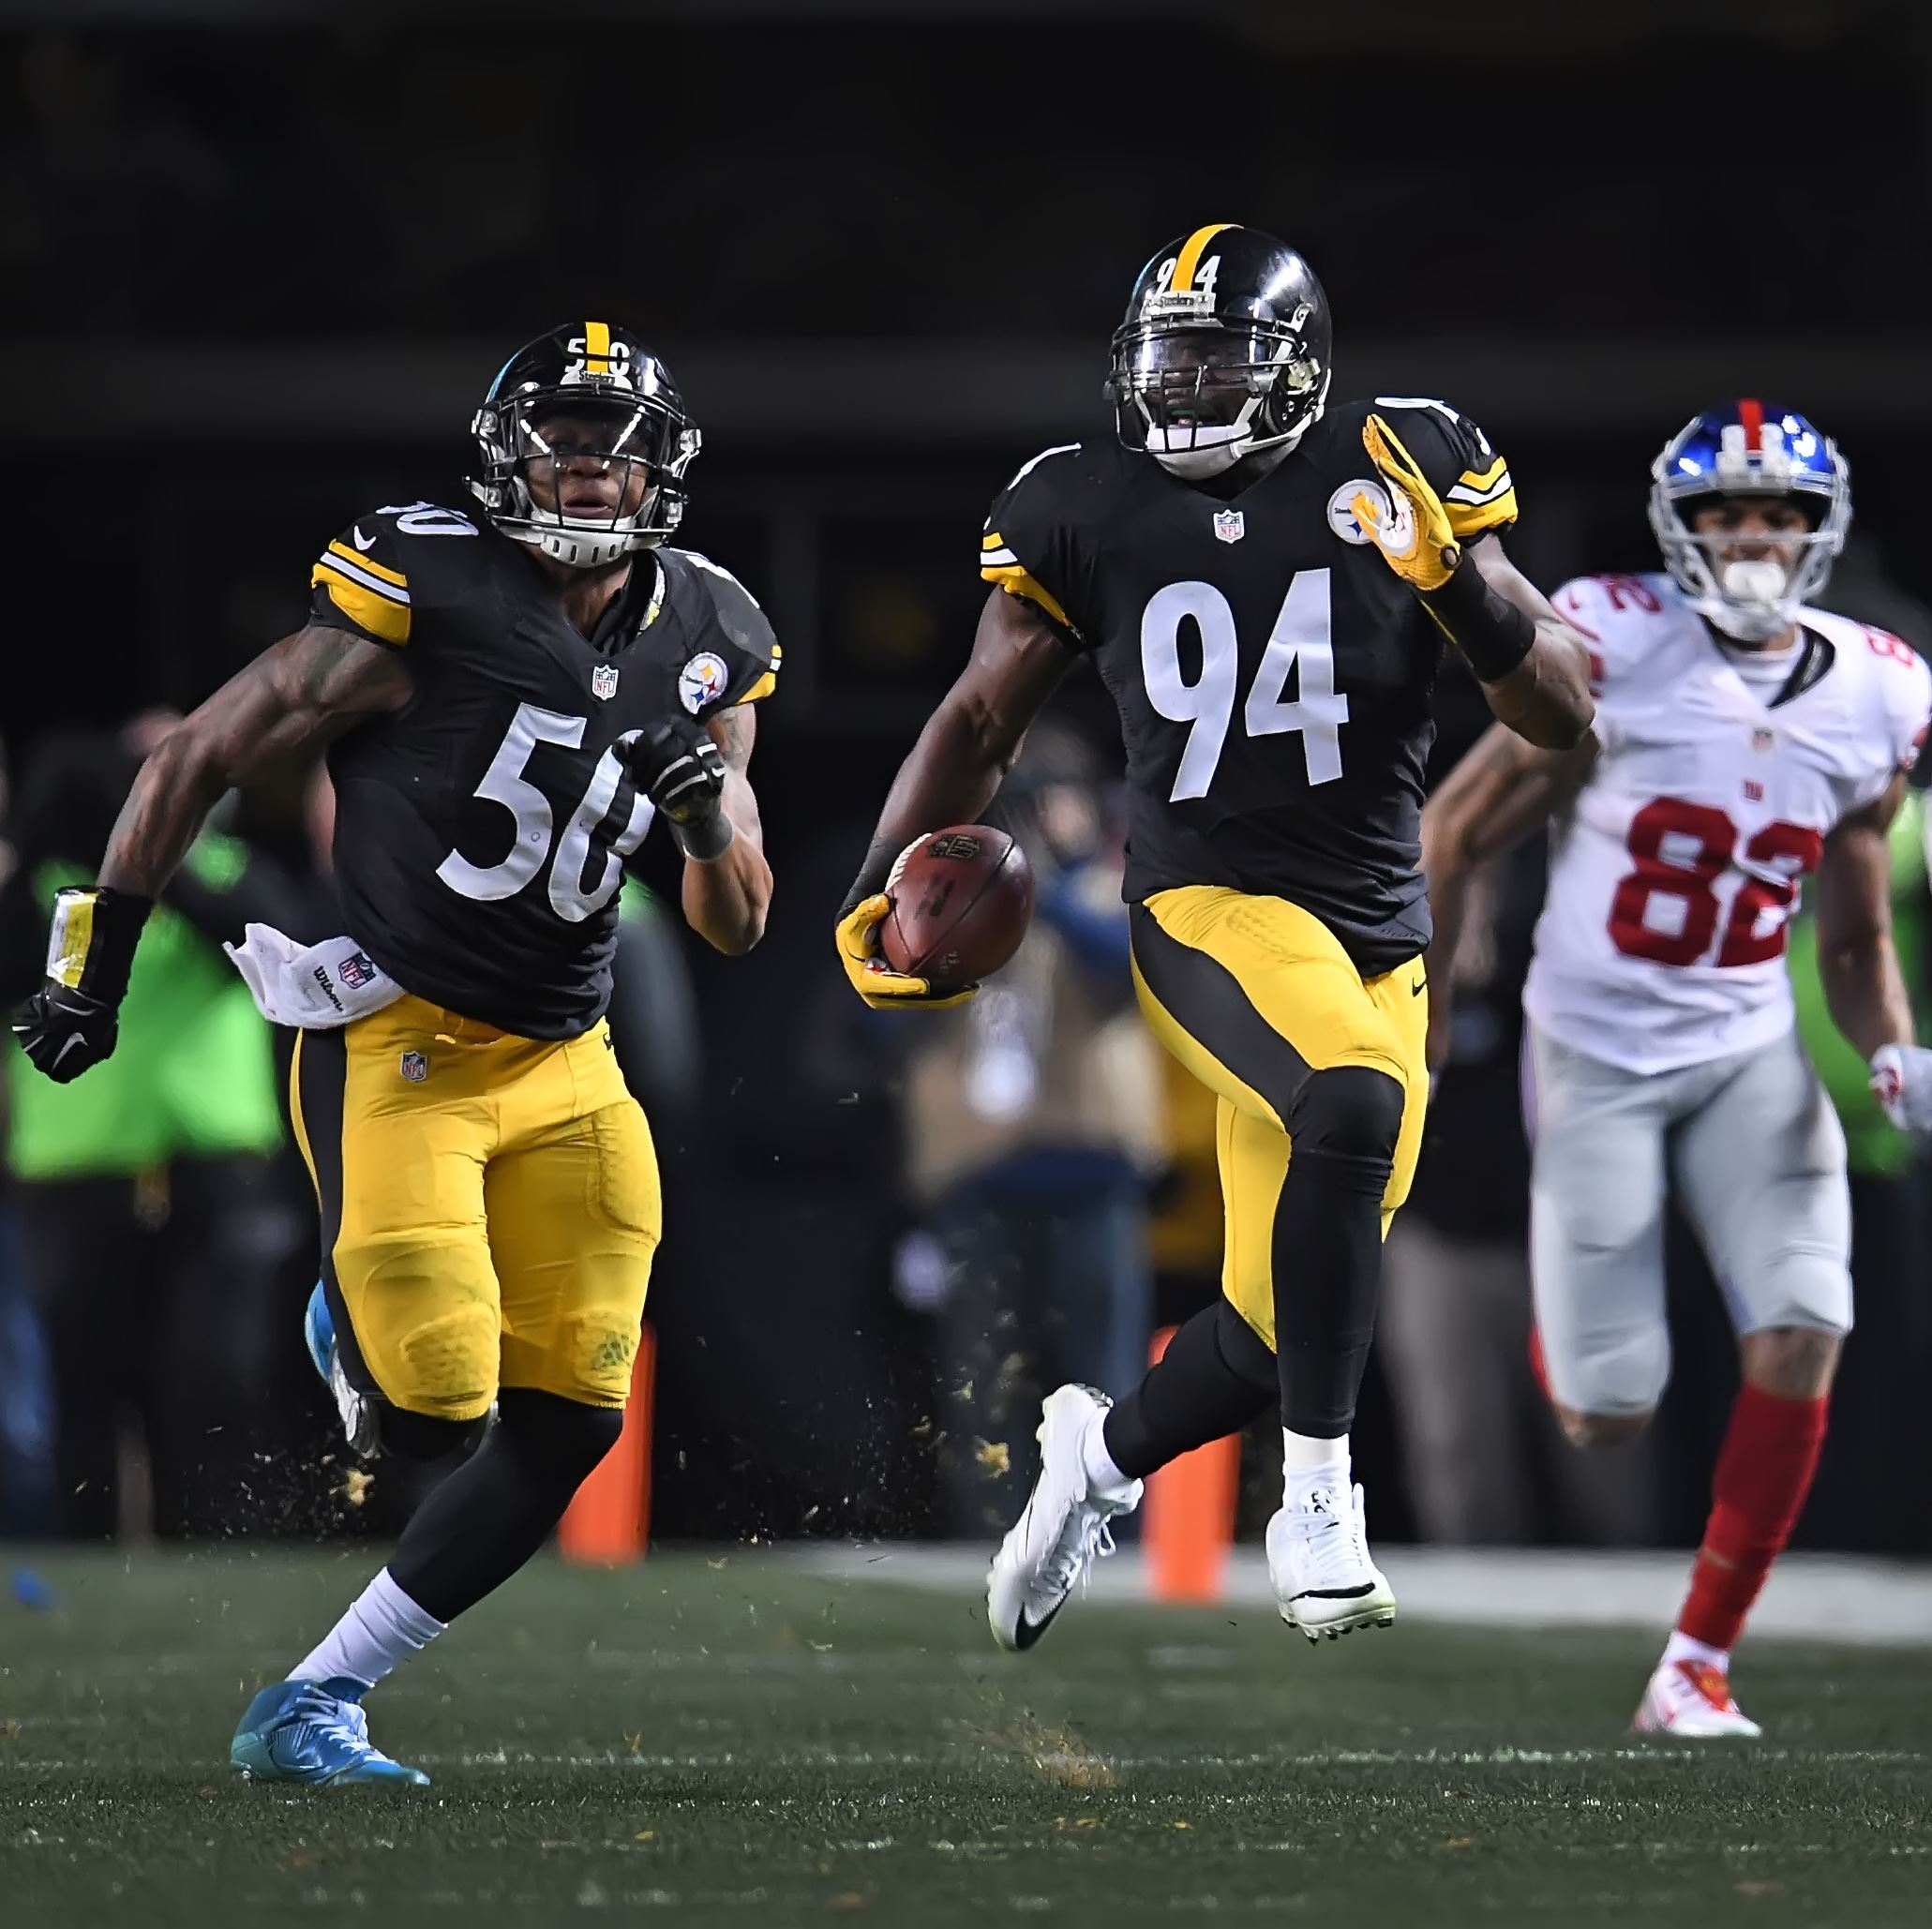 Lawrence Timmons, Steelers 2017 free agents, Ryan Shazier, Steelers vs Giants, Lawrence Timmons interception, Roger Lewis